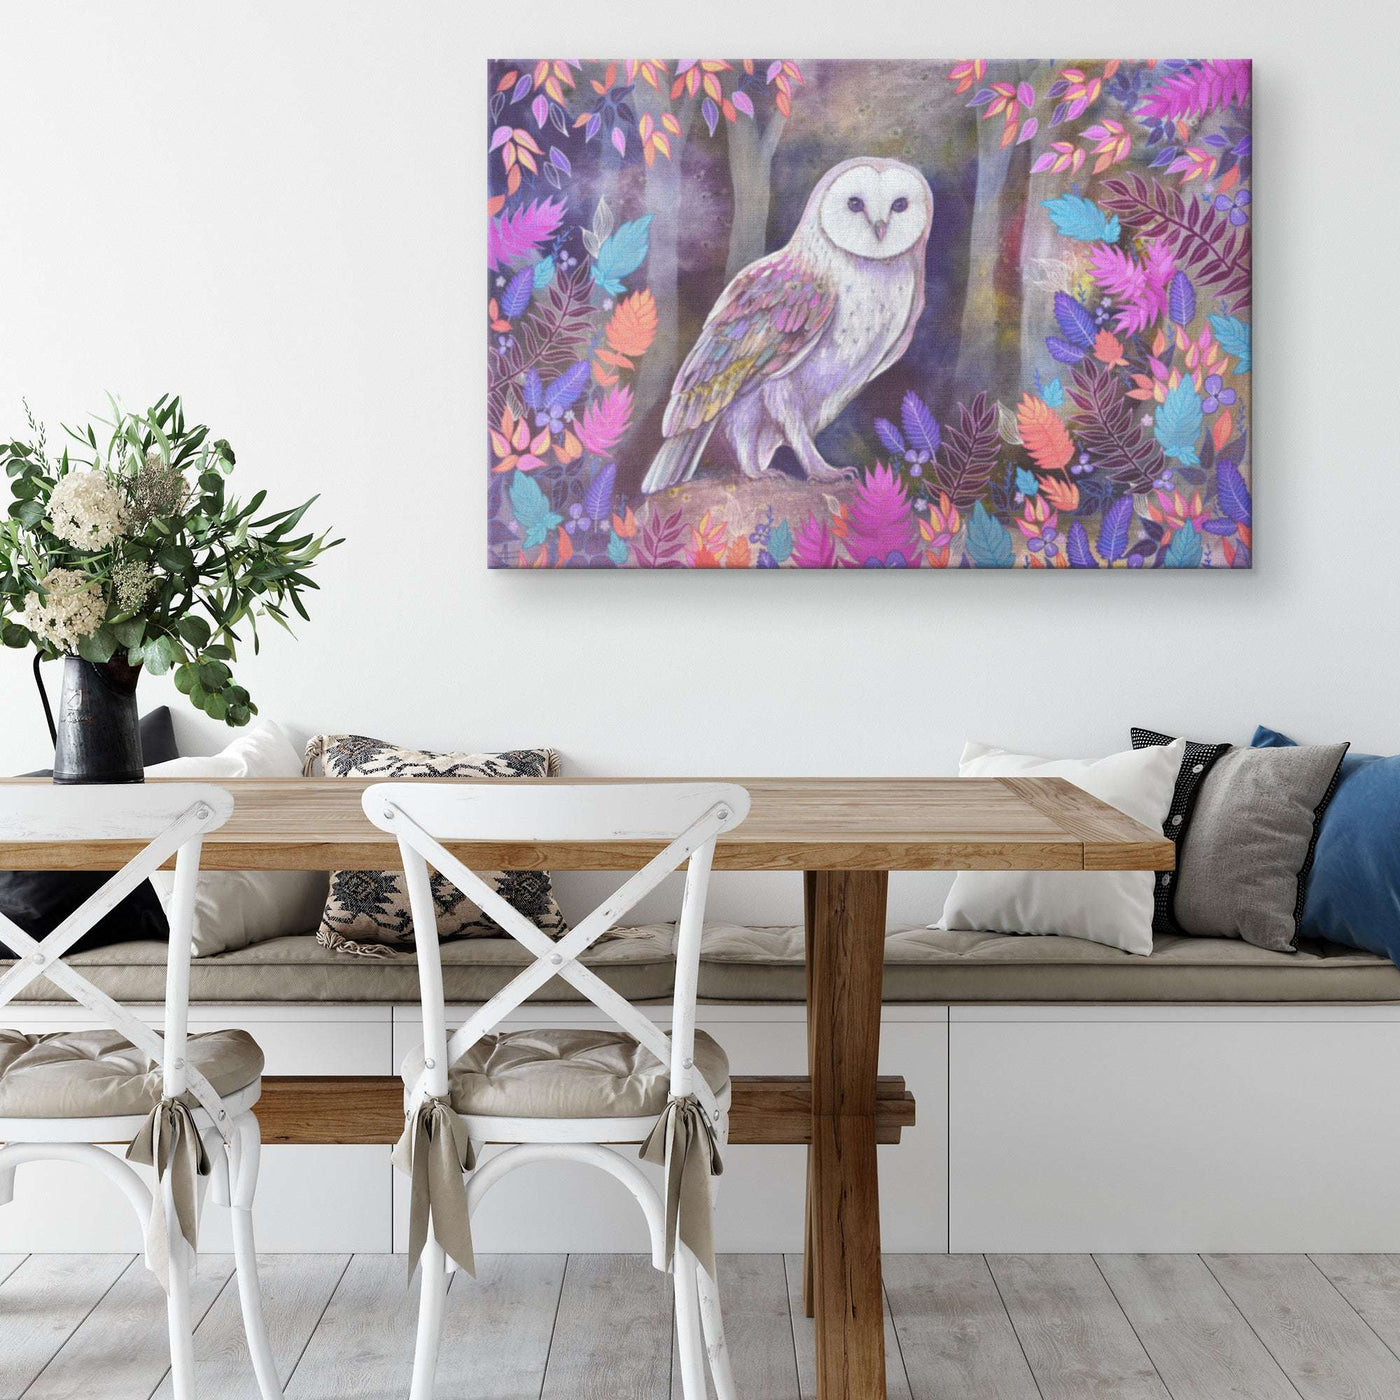 A vibrant Canvas Owl Art Print of a white barn owl perched amidst colorful foliage hangs above a modern wooden dining table.